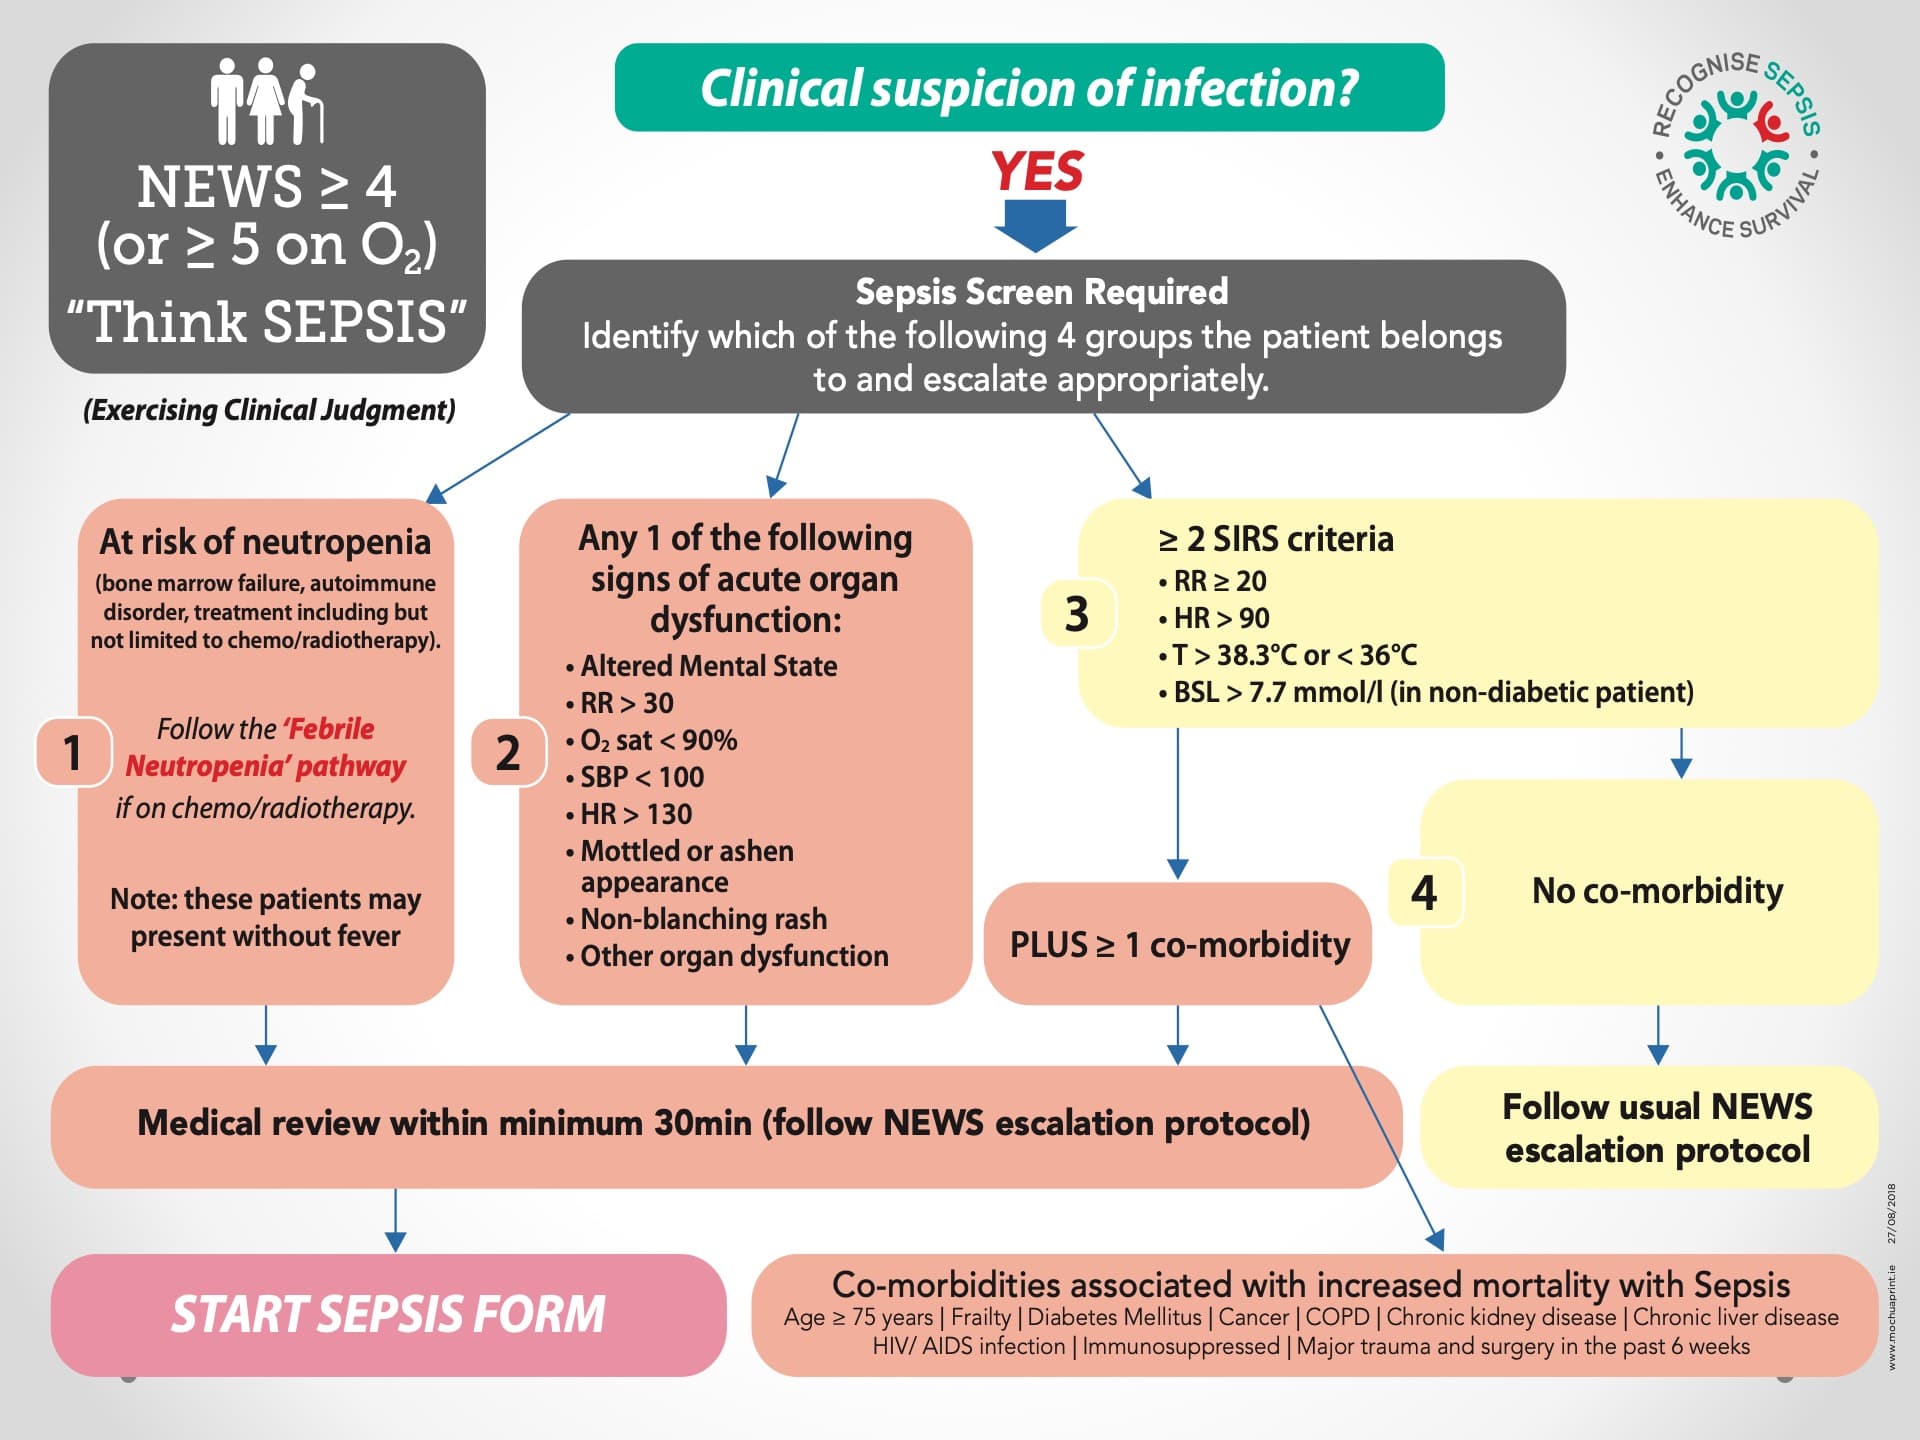 The National Sepsis Plan in Ireland4.jpeg